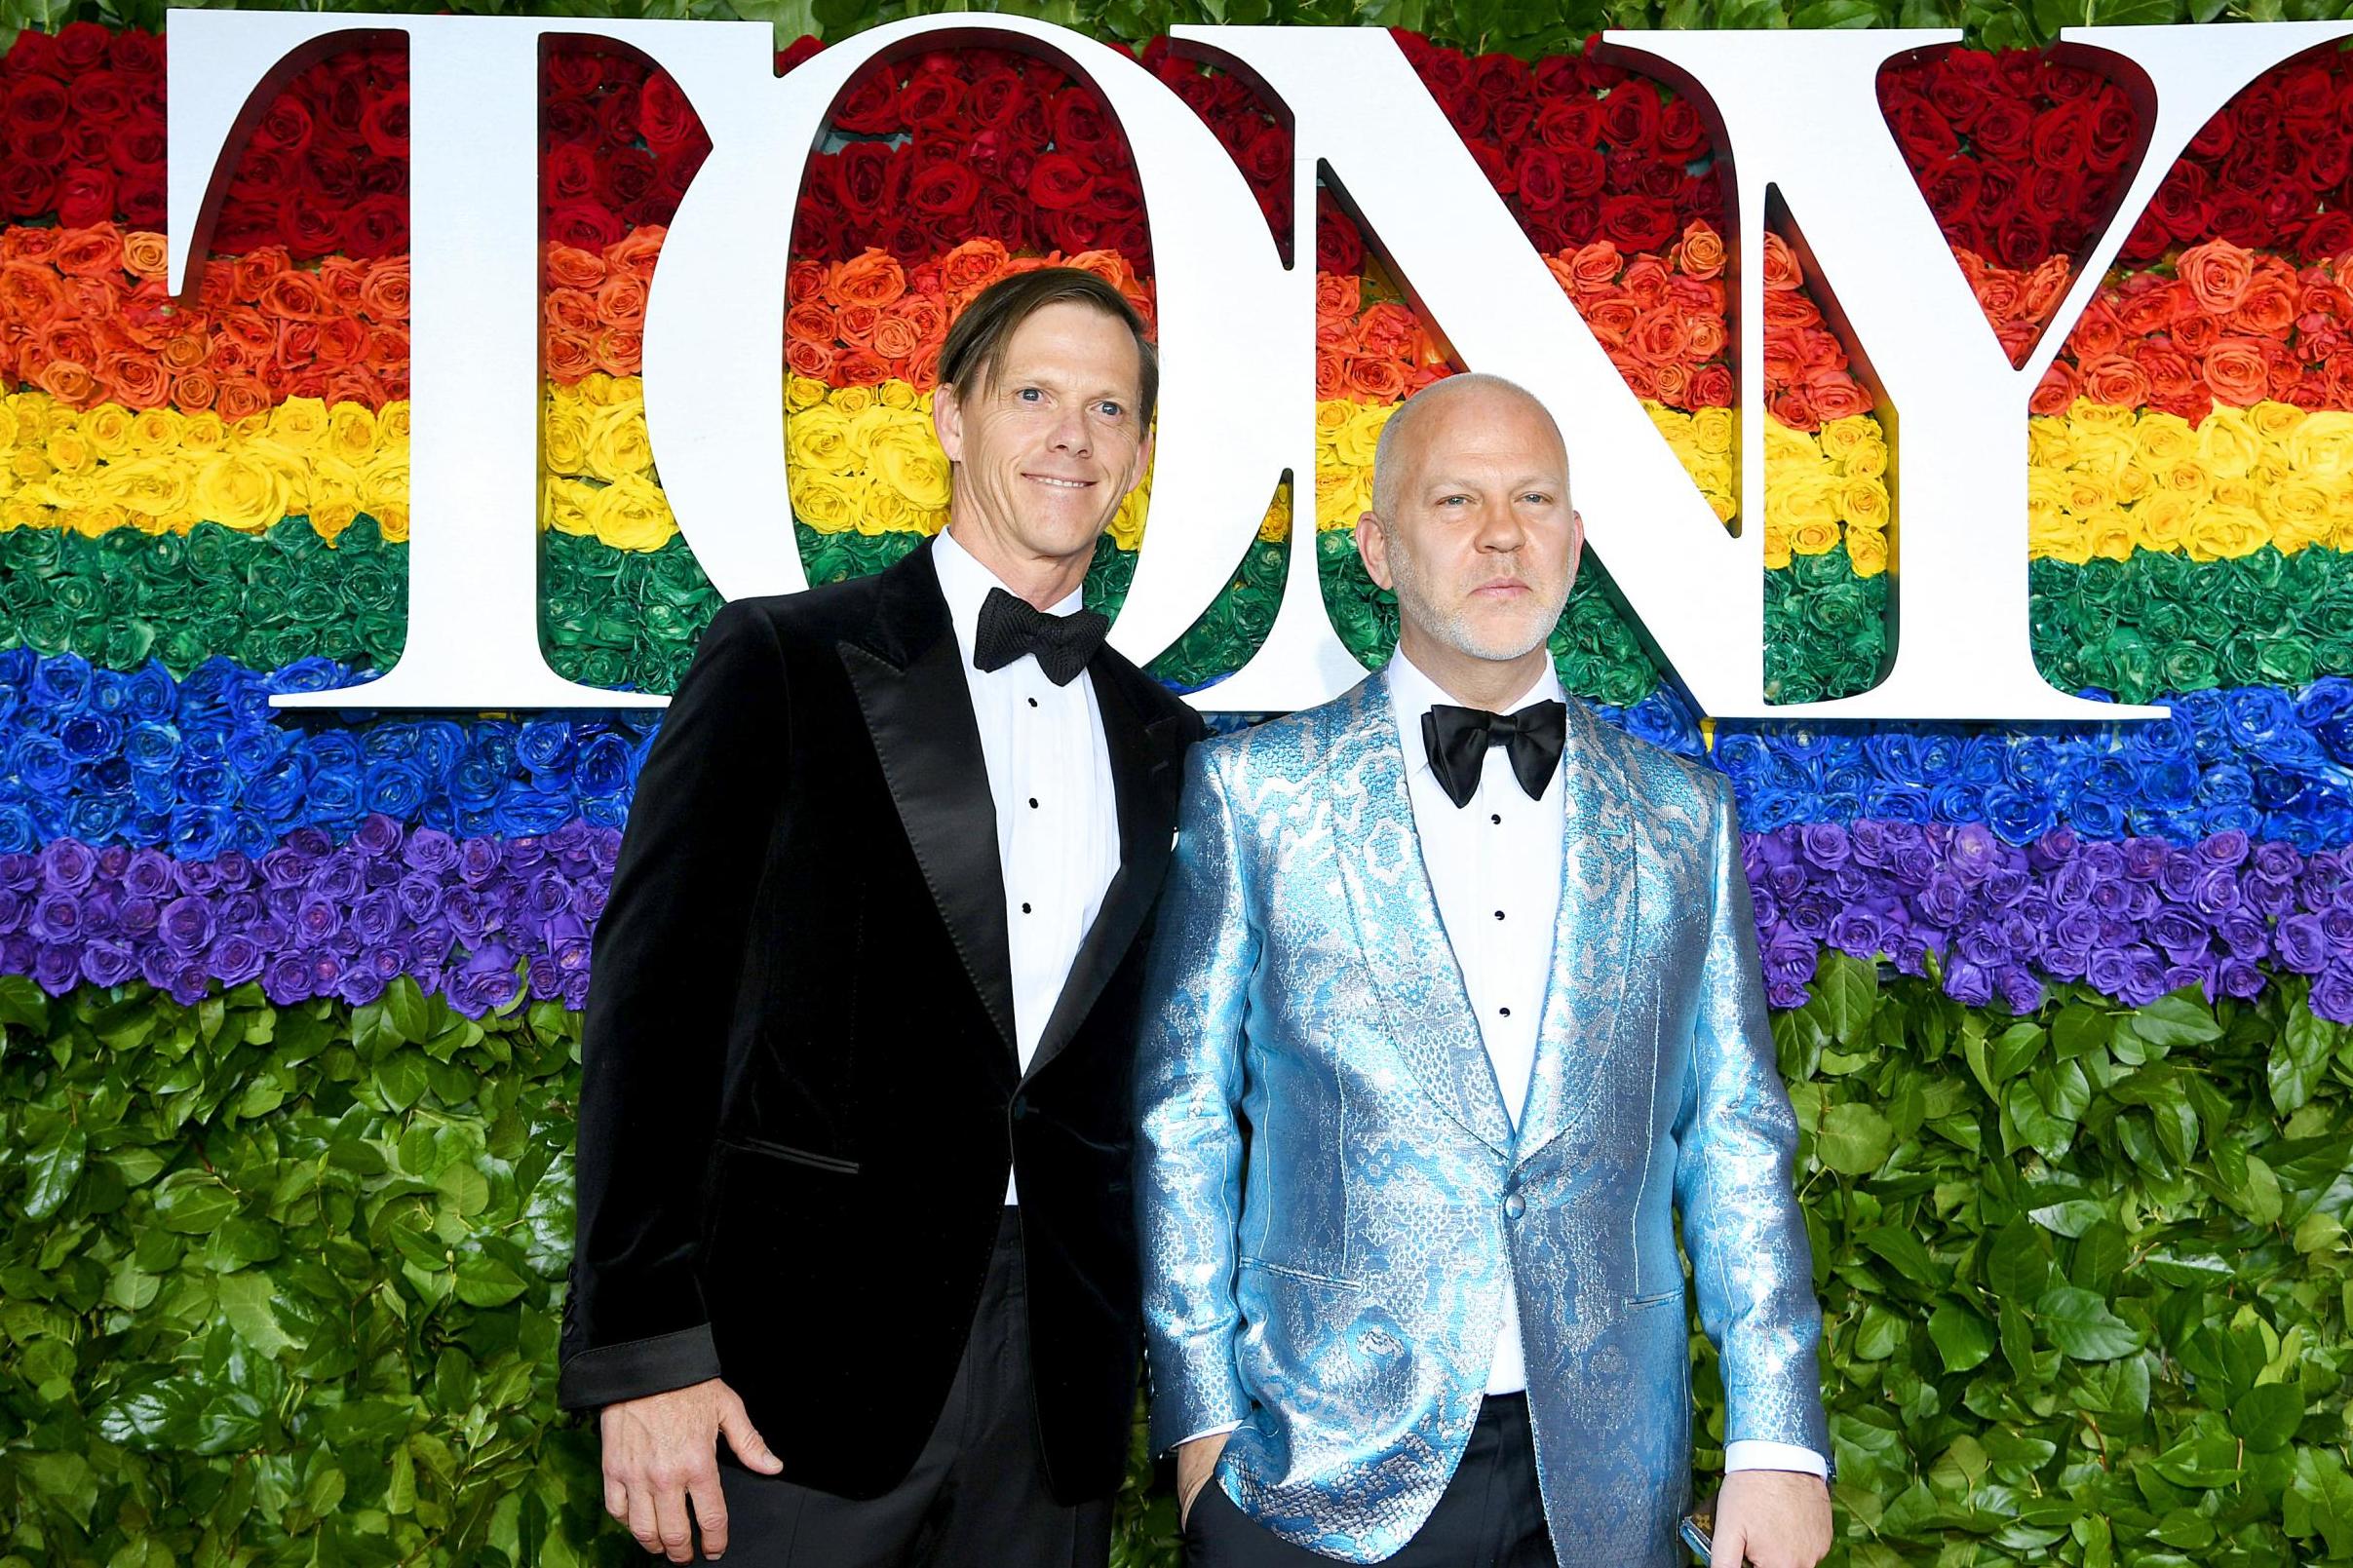 Ryan Murphy (right) and his husband David Miller (left) at the 73rd Annual Tony Awards on 9 June, 2019 in New York City.